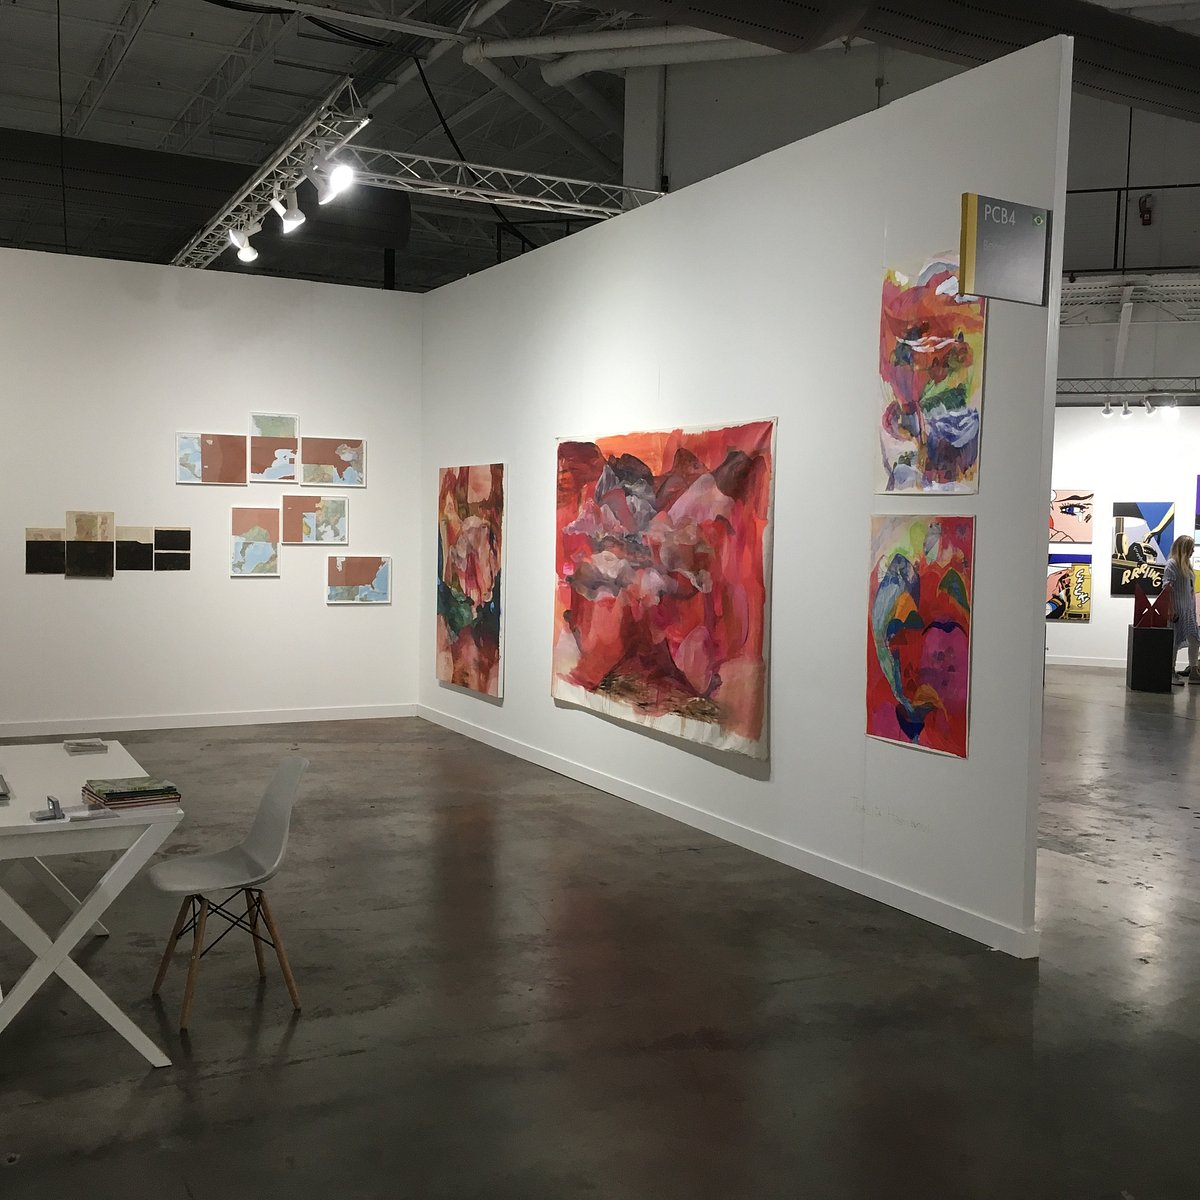 ART BASEL (Miami Beach) All You Need to Know BEFORE You Go